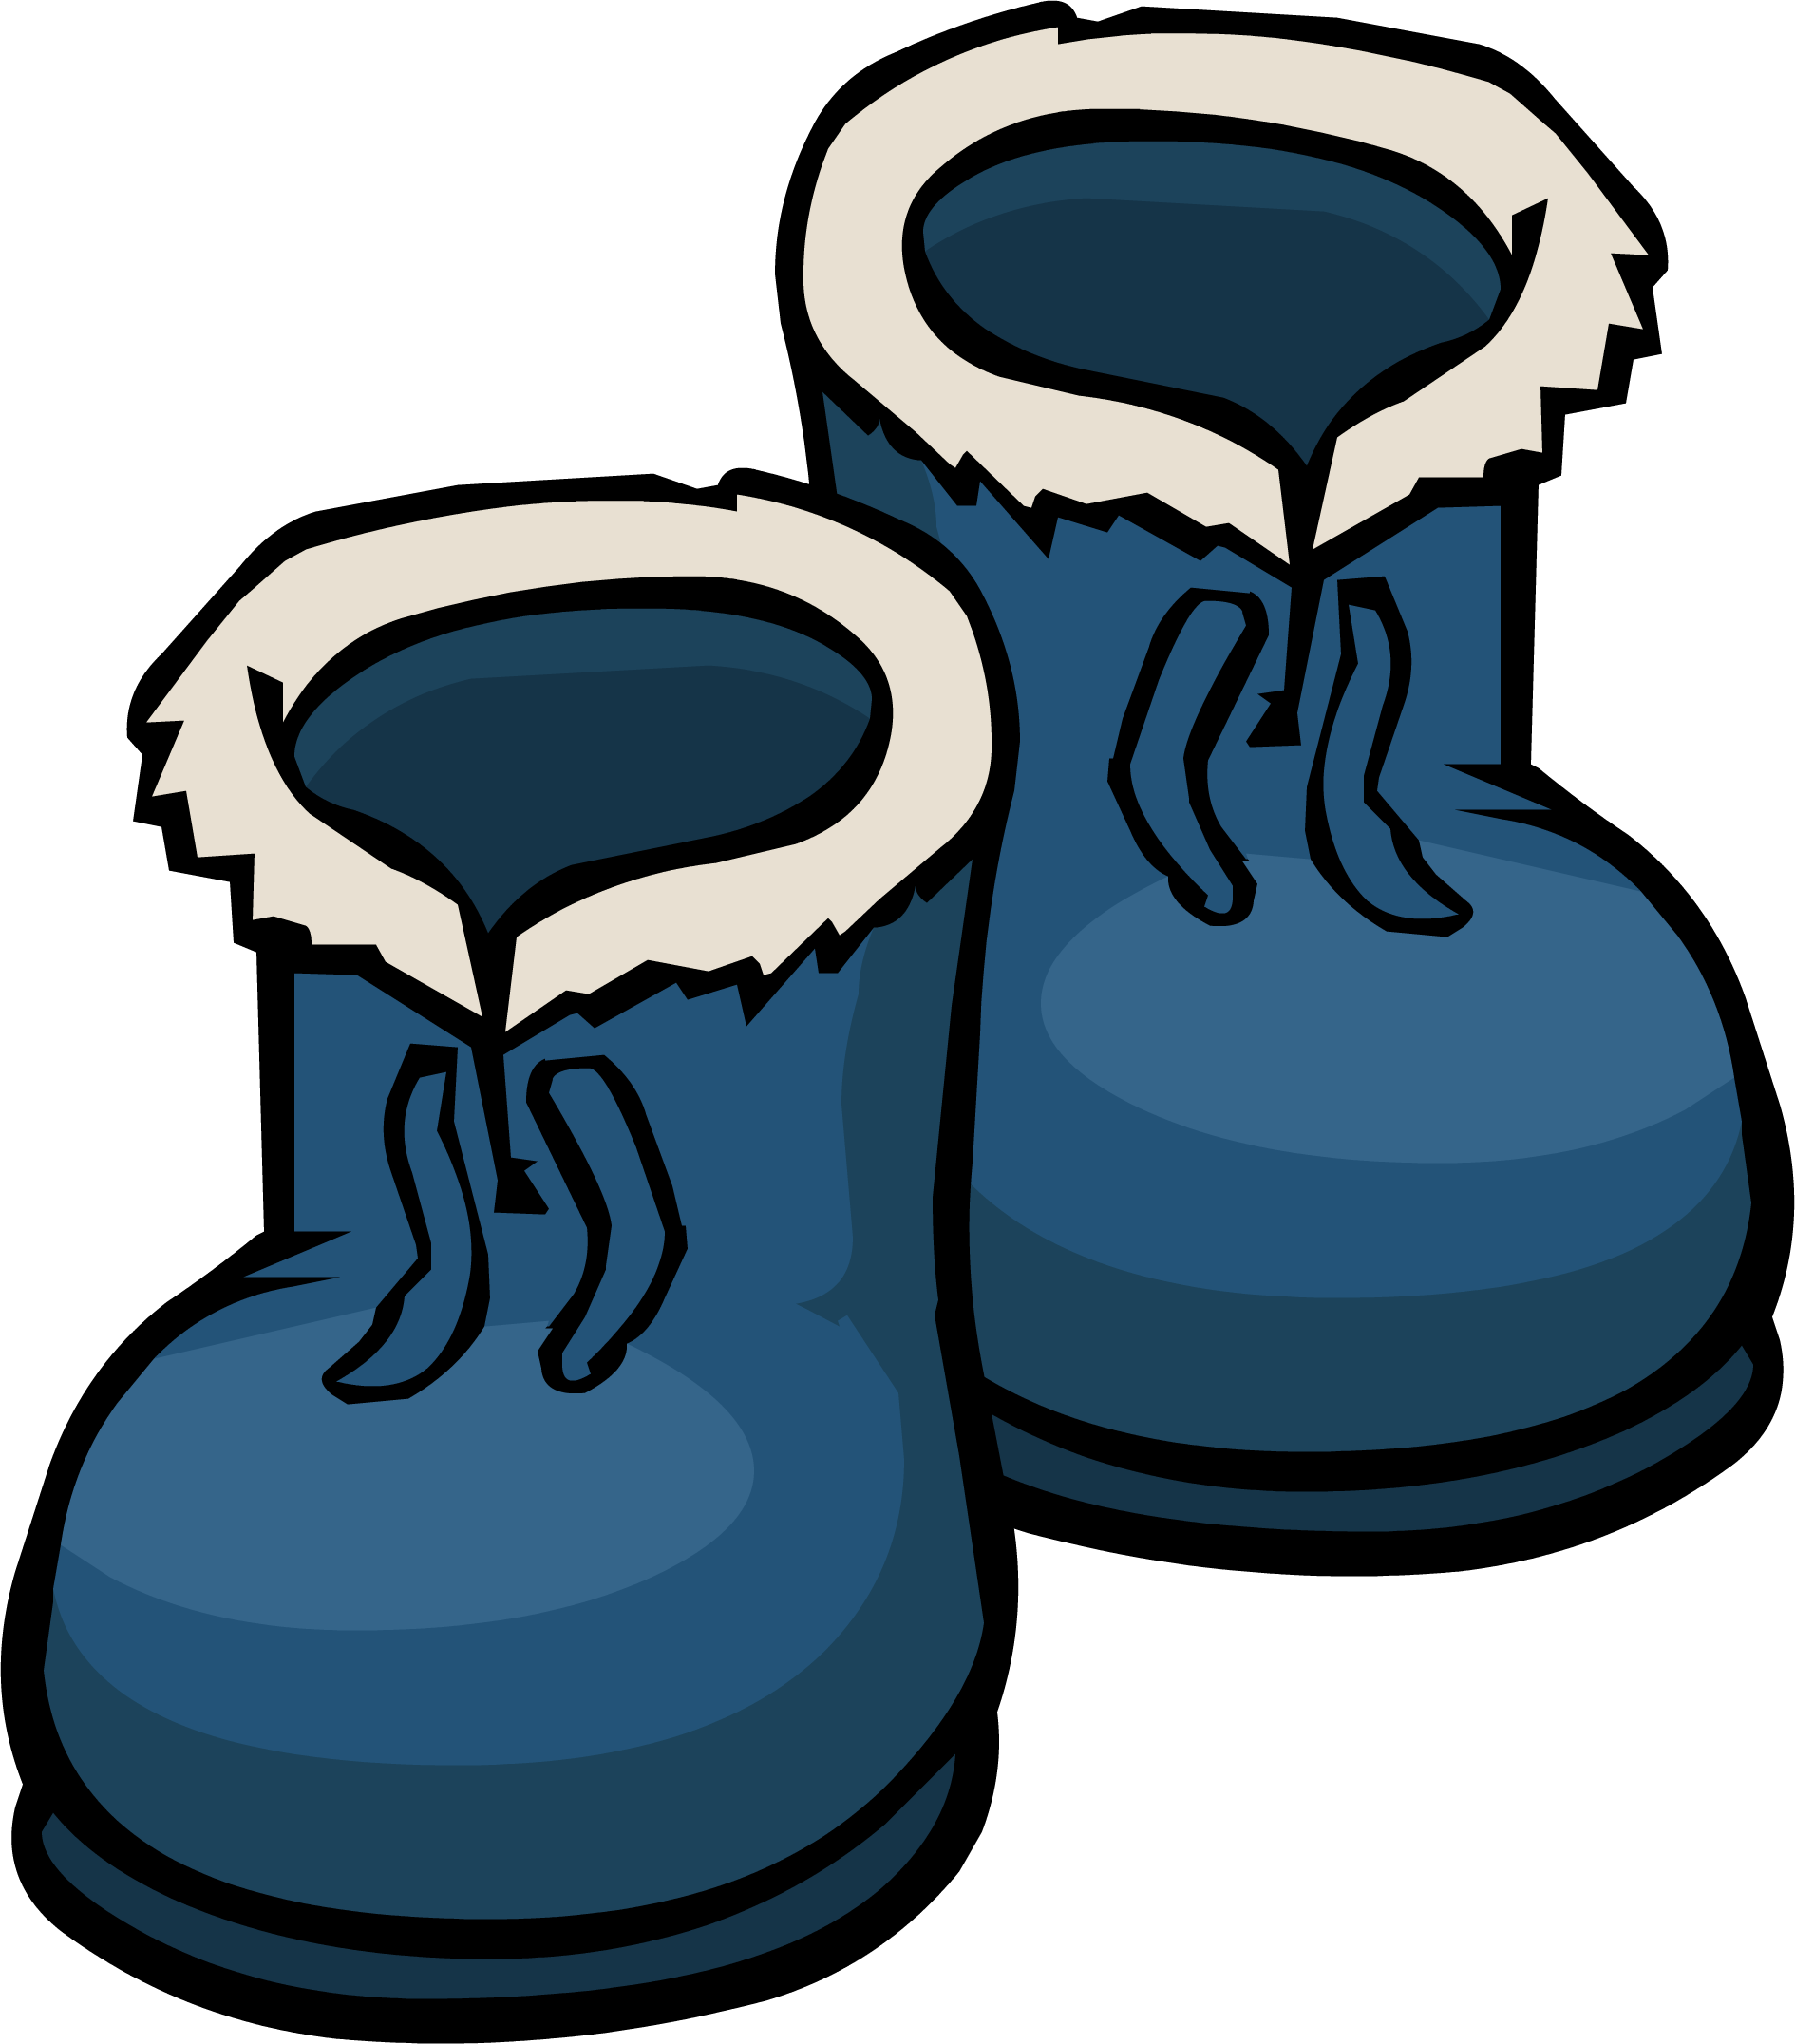 Mittens clipart boot. Blue winter boots club